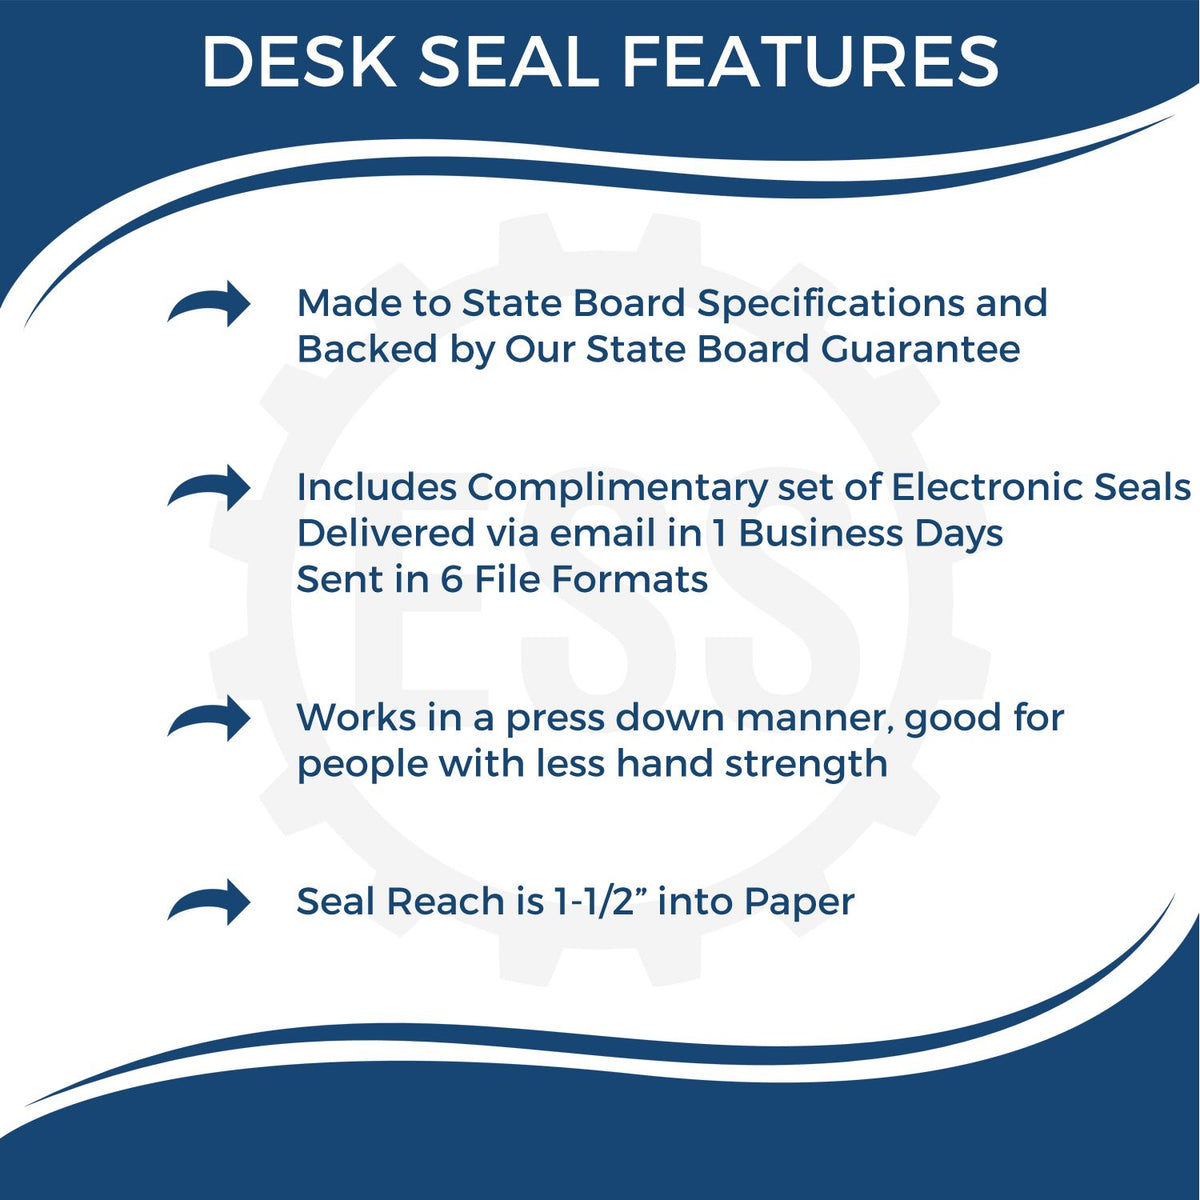 A picture of an infographic highlighting the selling points for the North Dakota Geologist Desk Seal